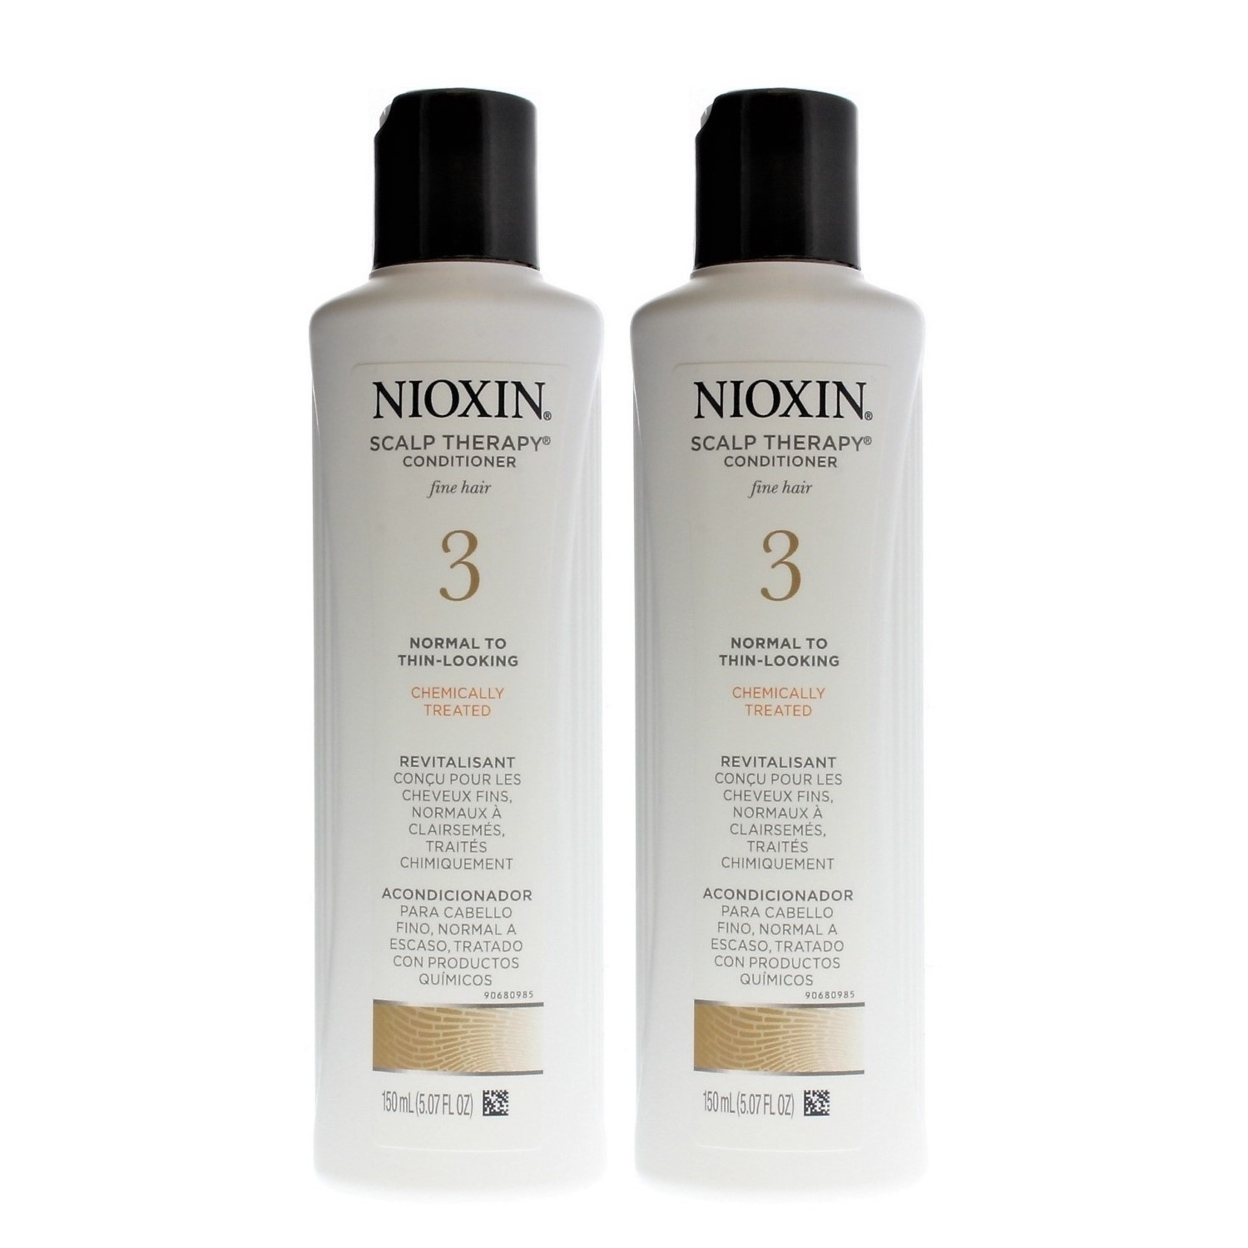 Nioxin System 3 Scalp Therapy Conditioner 5.07oz/150ml (2 Pack)